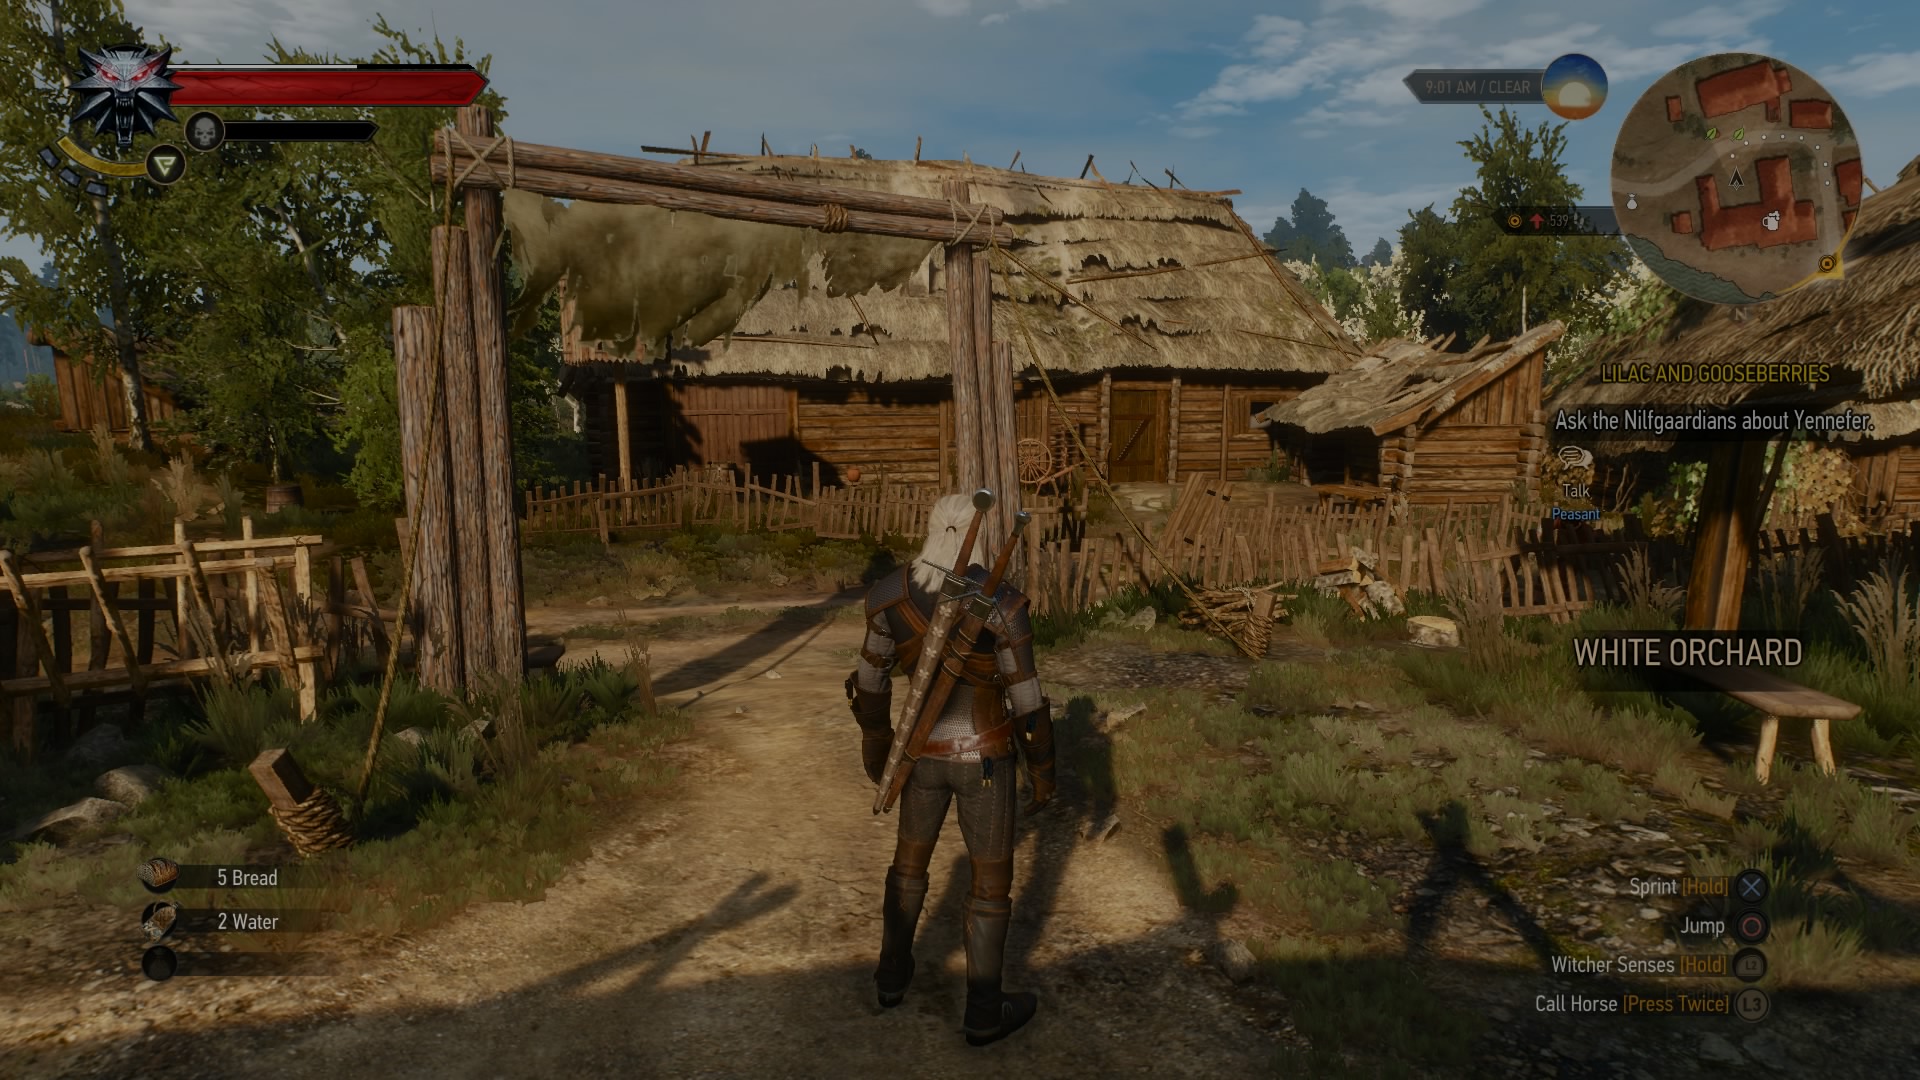 The Witcher Wild Hunt Video Game Sony PS4